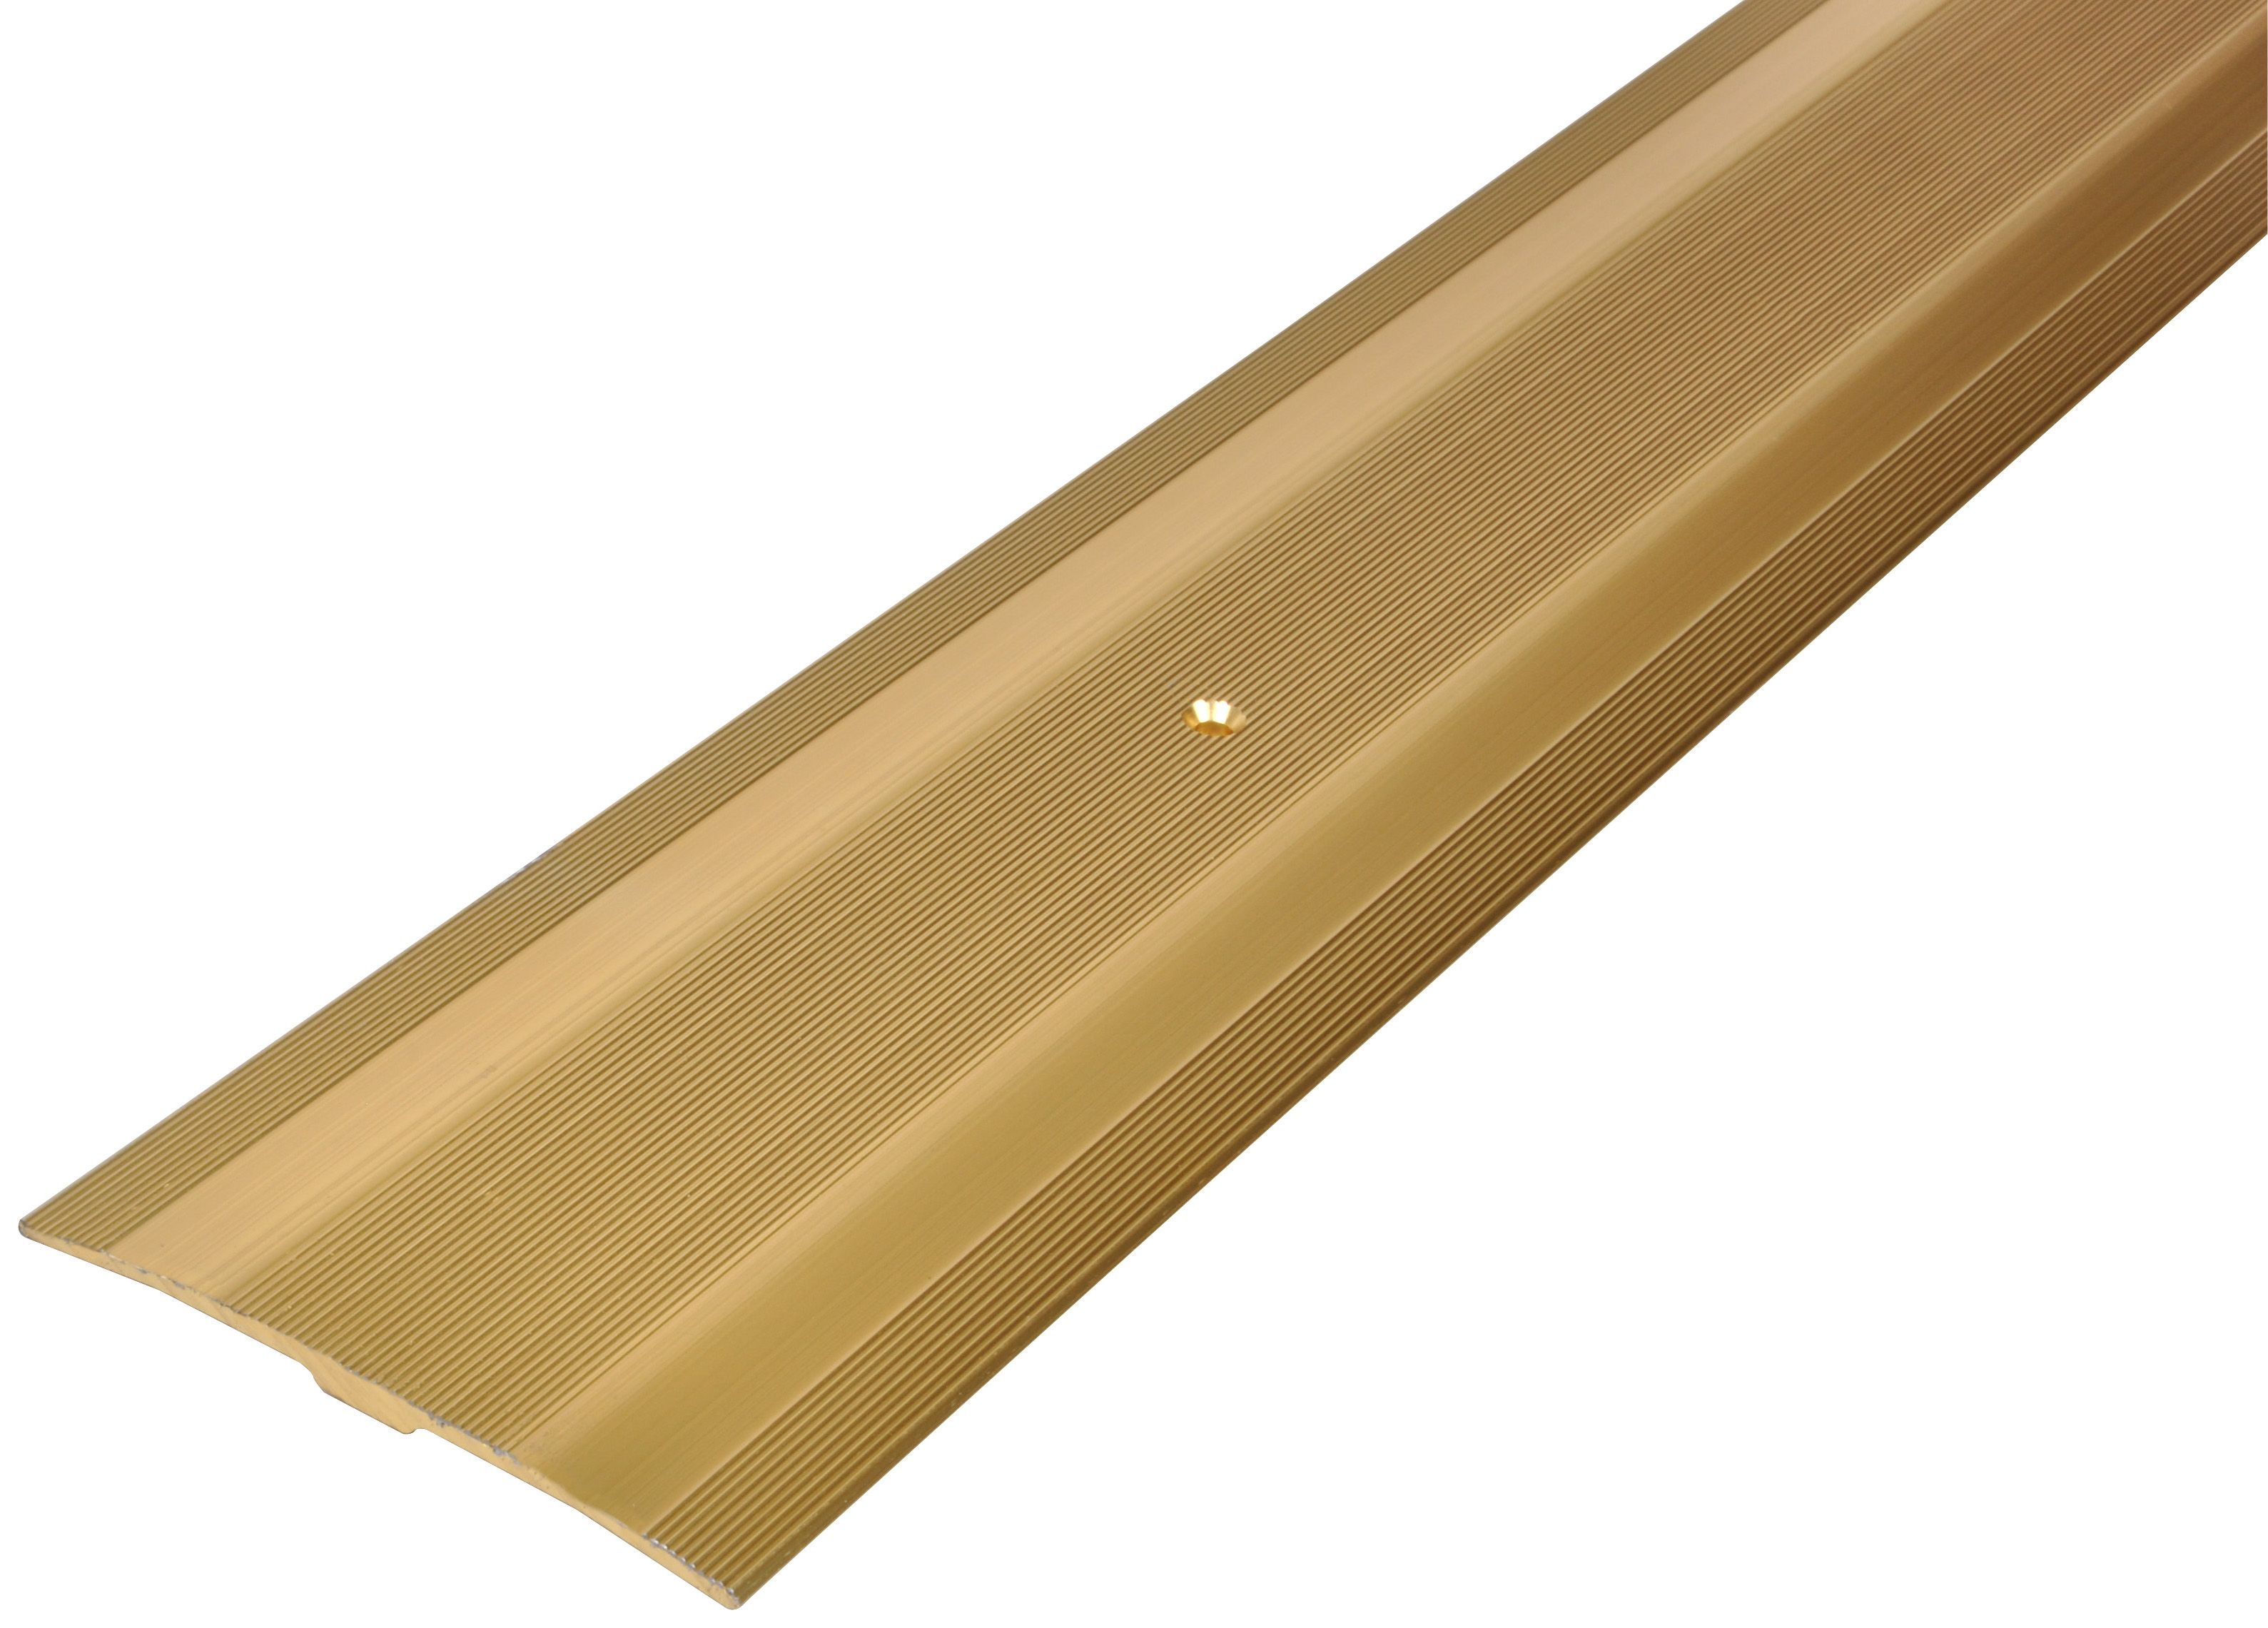 Vitrex Extra Wide Gold Cover Strip - 1.8m